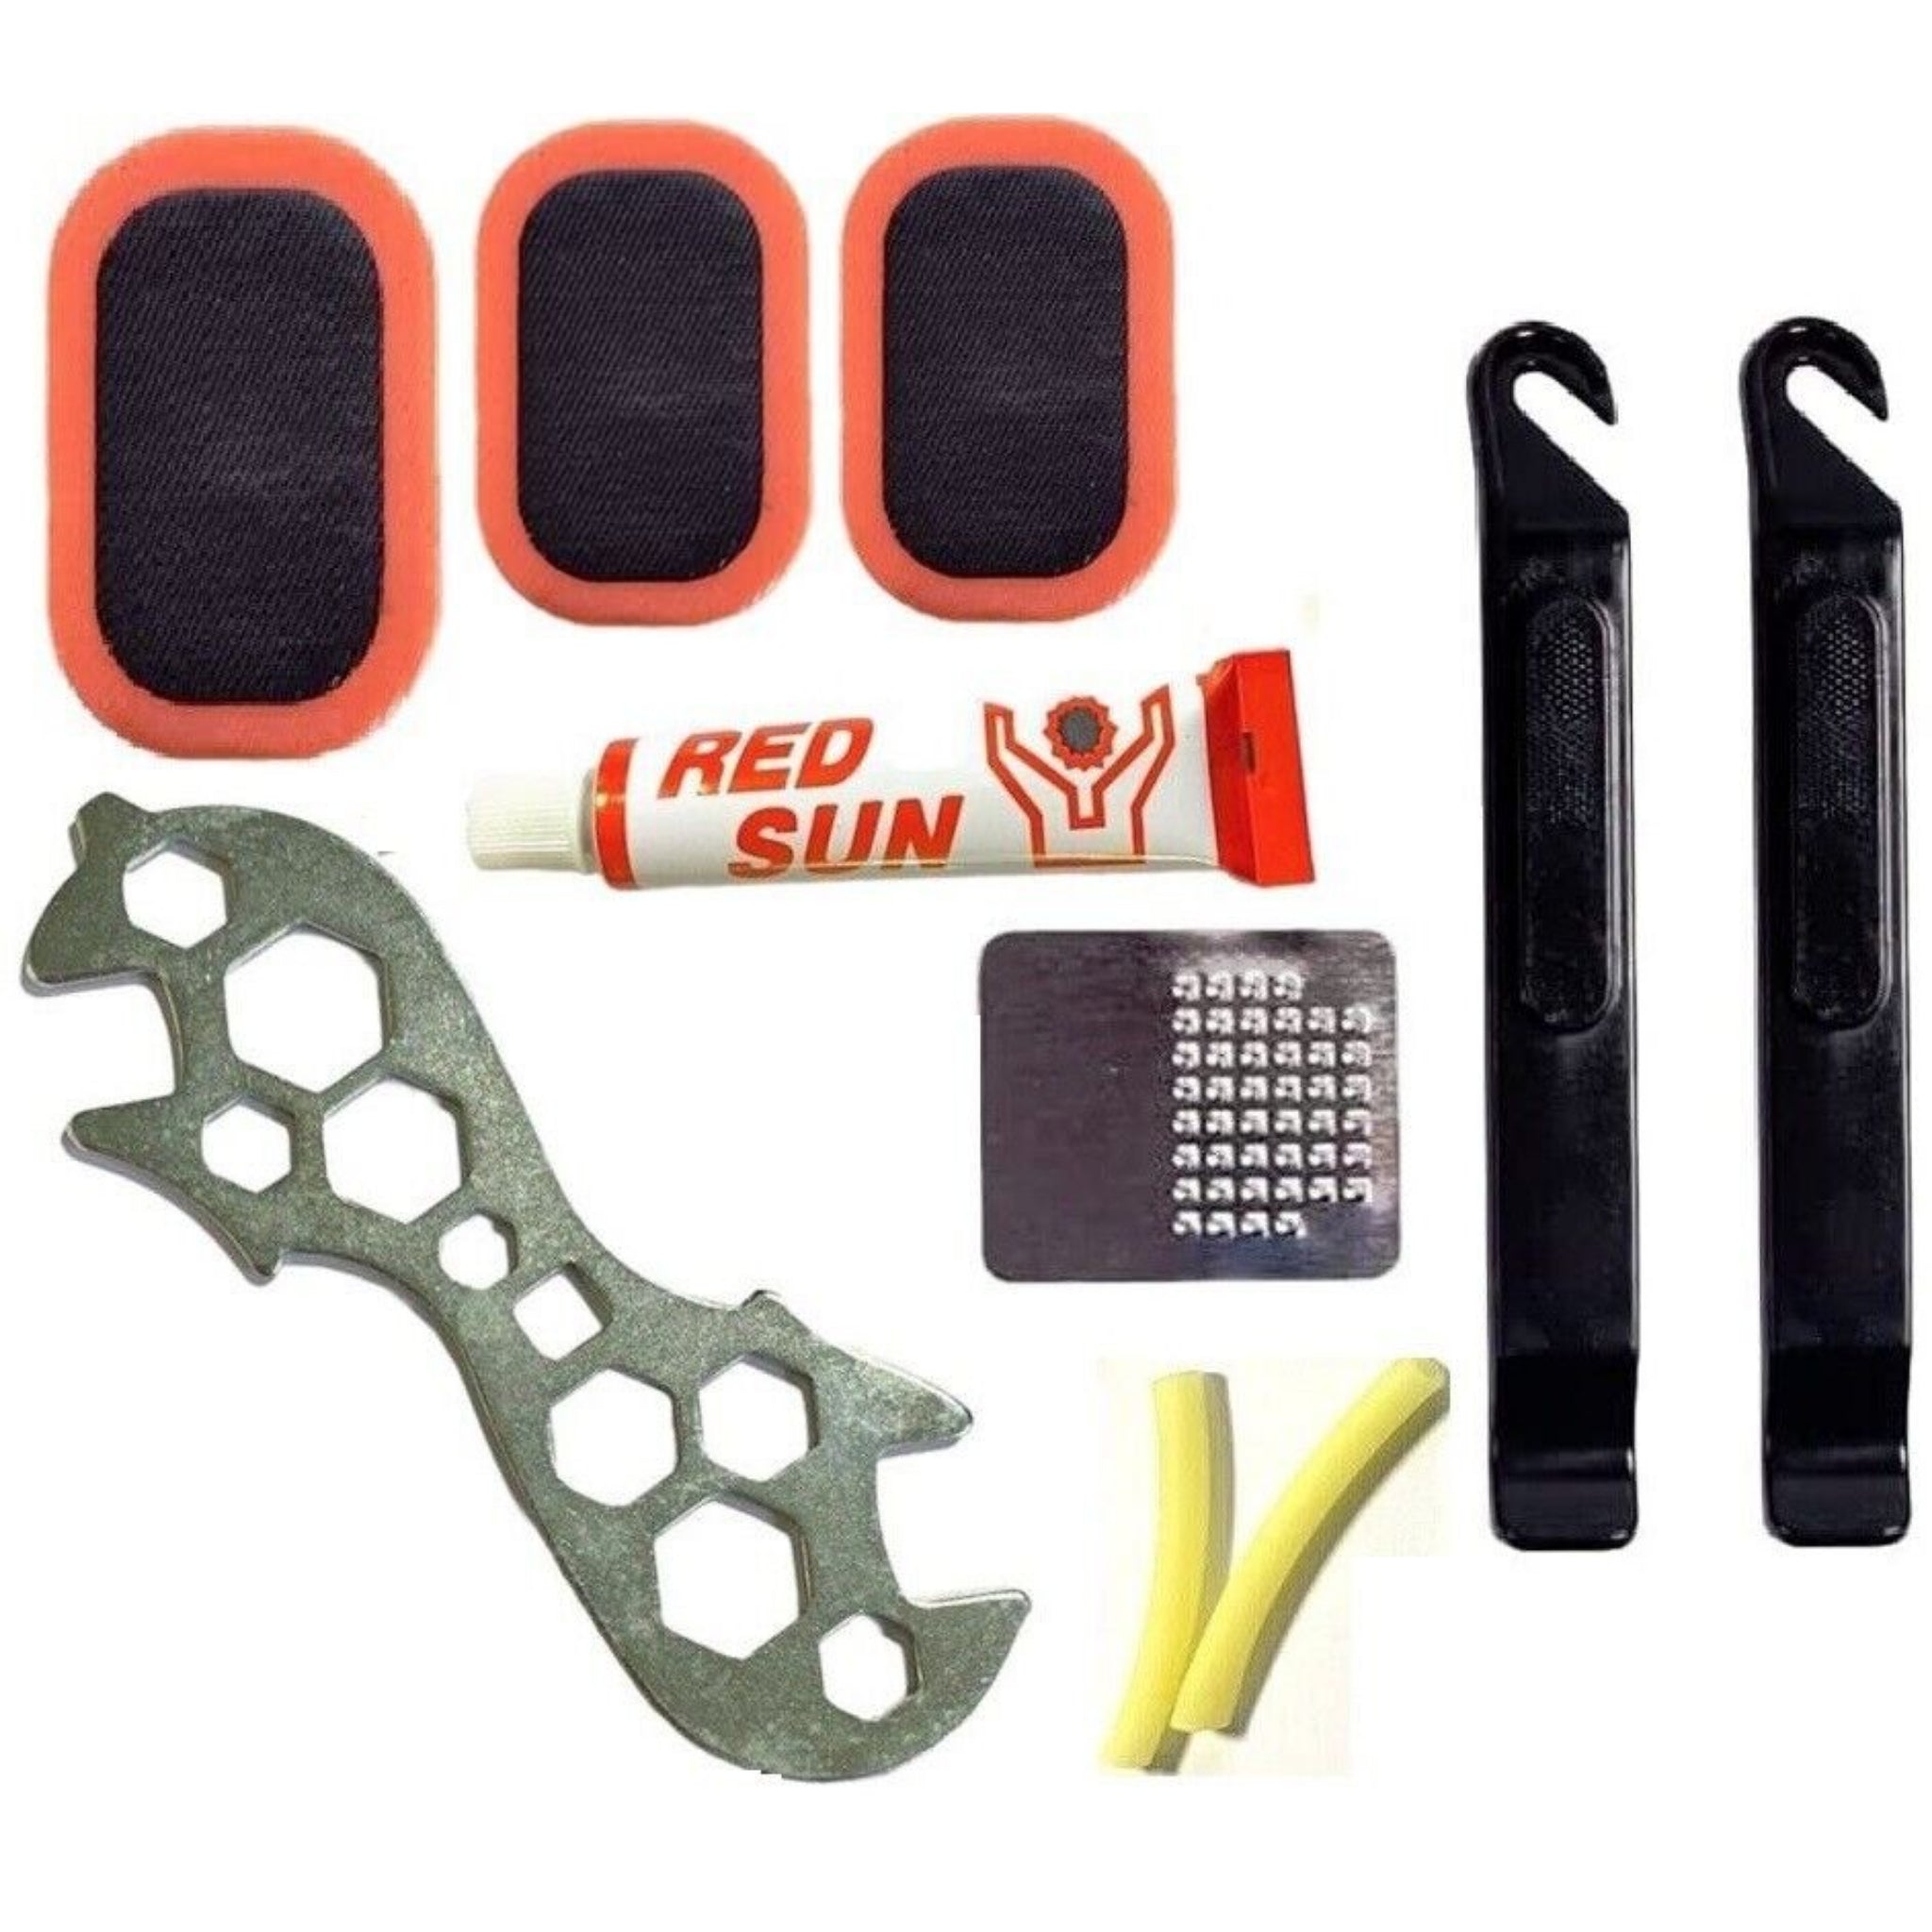 Beclen Harp 10pc Bicycle/Bike/Cycle Puncture Repair Portable Tool Kit Including Inner Tube Patch And Glue